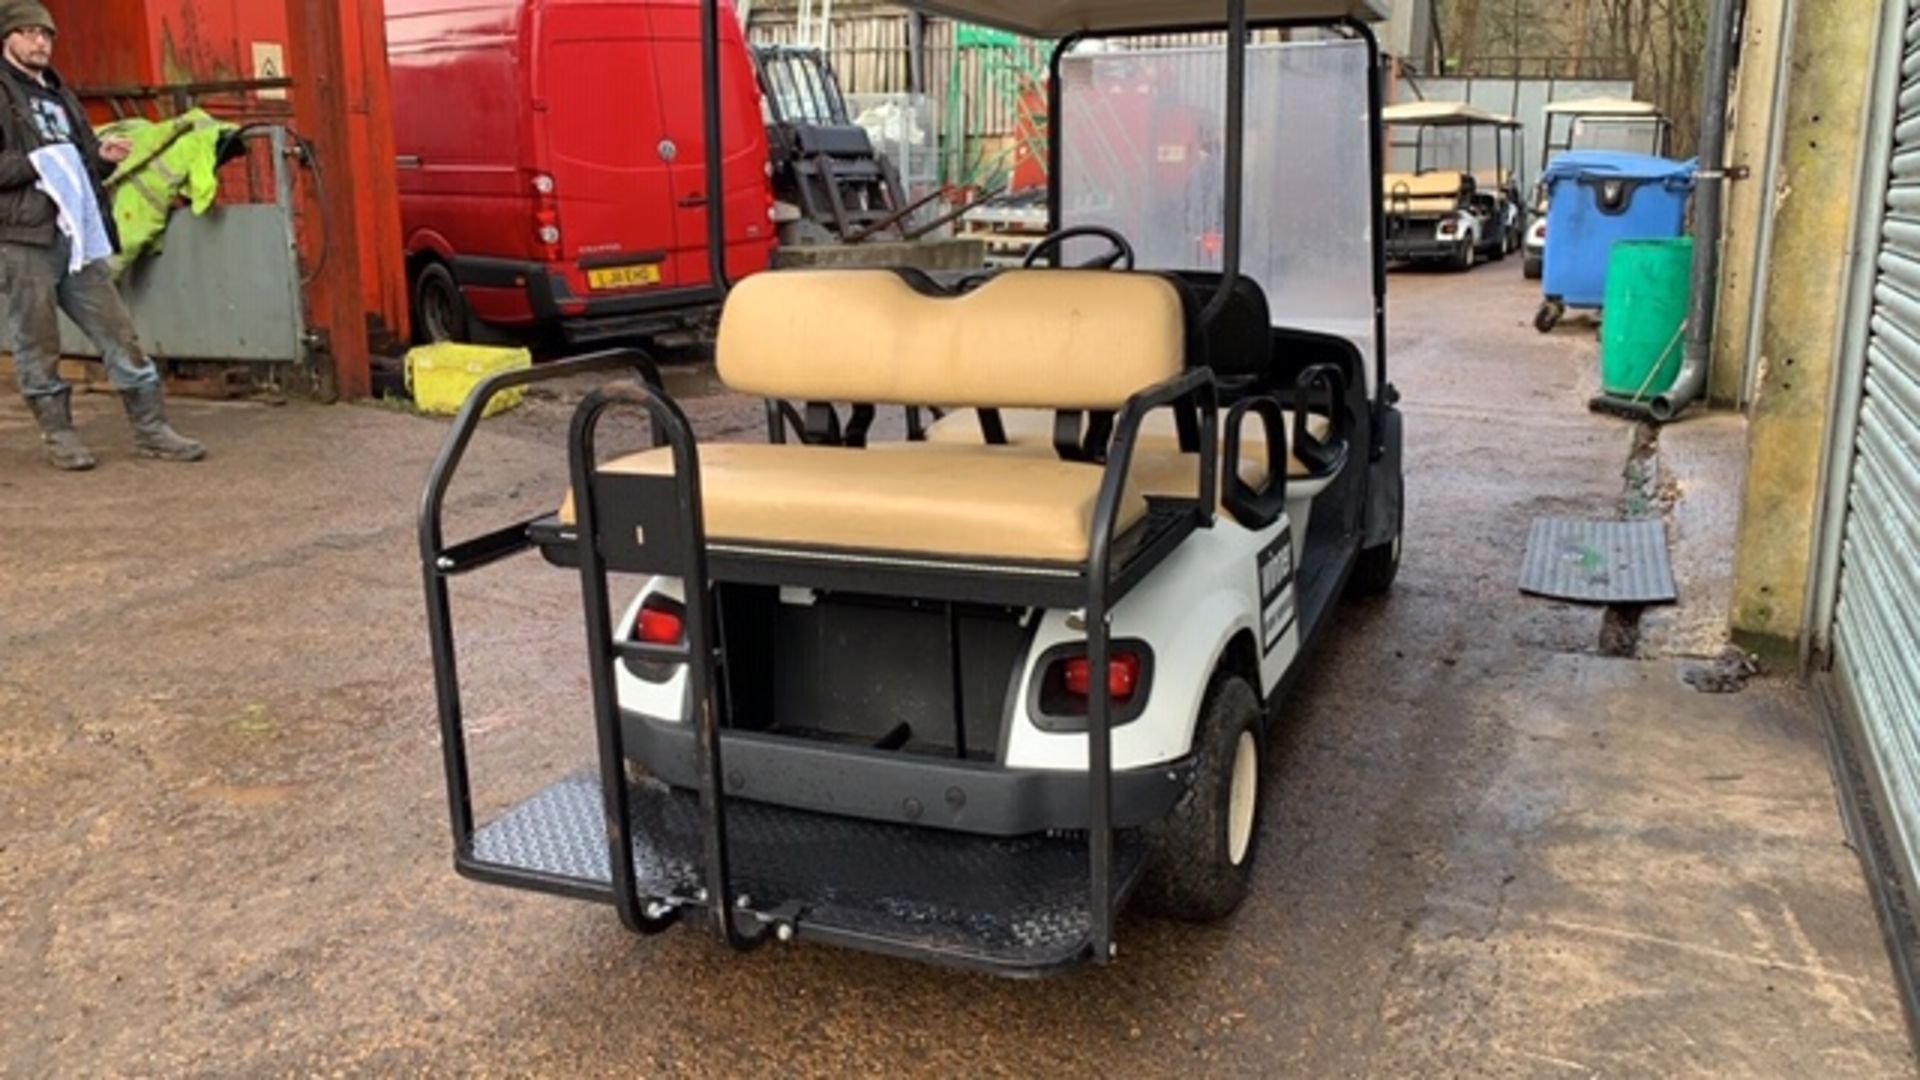 CUSHMAN EZGO SHUTTLE 6 PETROL ENGINED 6 SEATER GOLF / EVENTS BUGGY. YEAR 2017 BUILD. UNKNOWN REC - Image 4 of 5